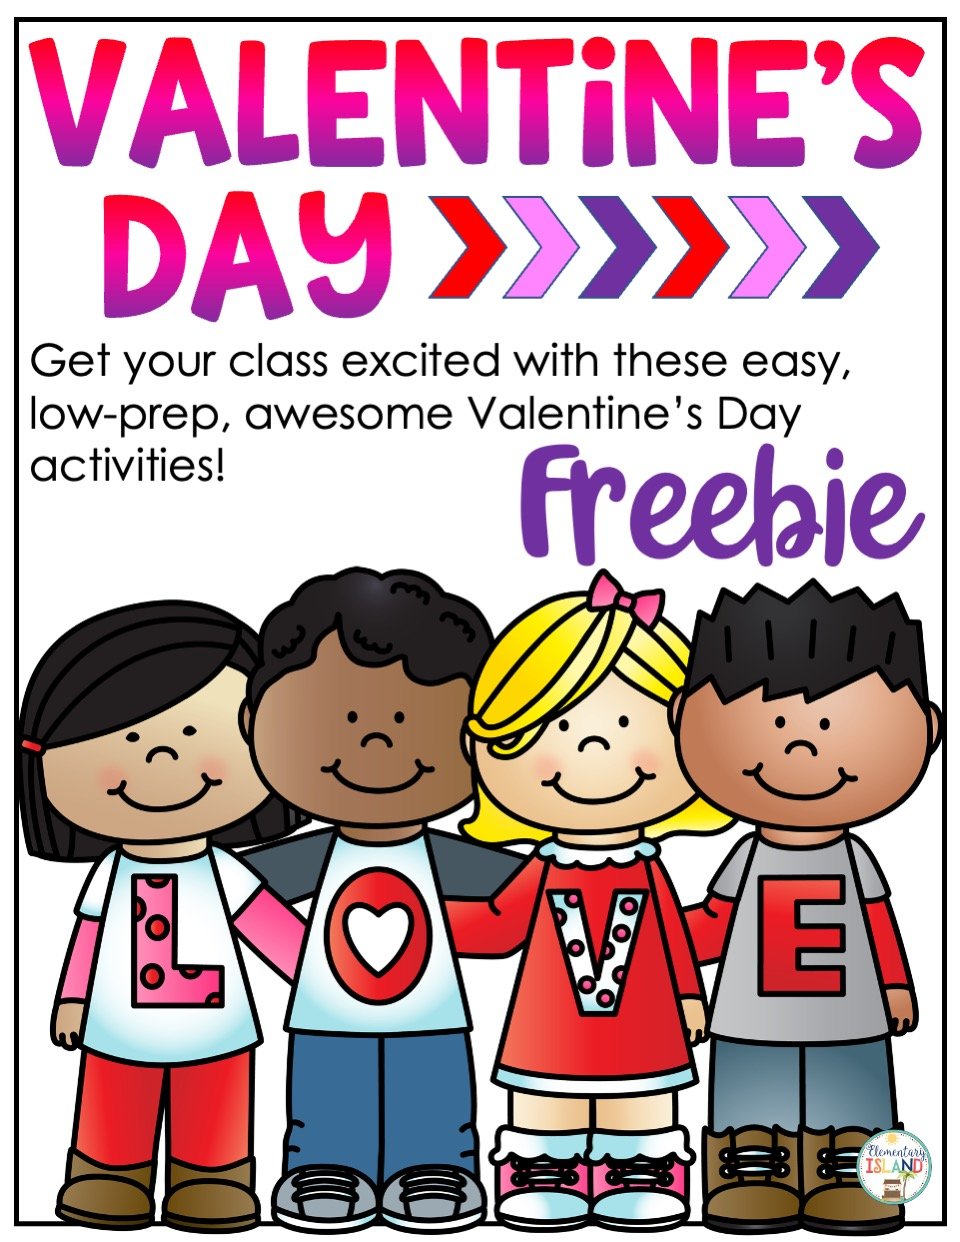 This freebie includes tons of ideas and templates for easy Valentine's day activities your students will love.